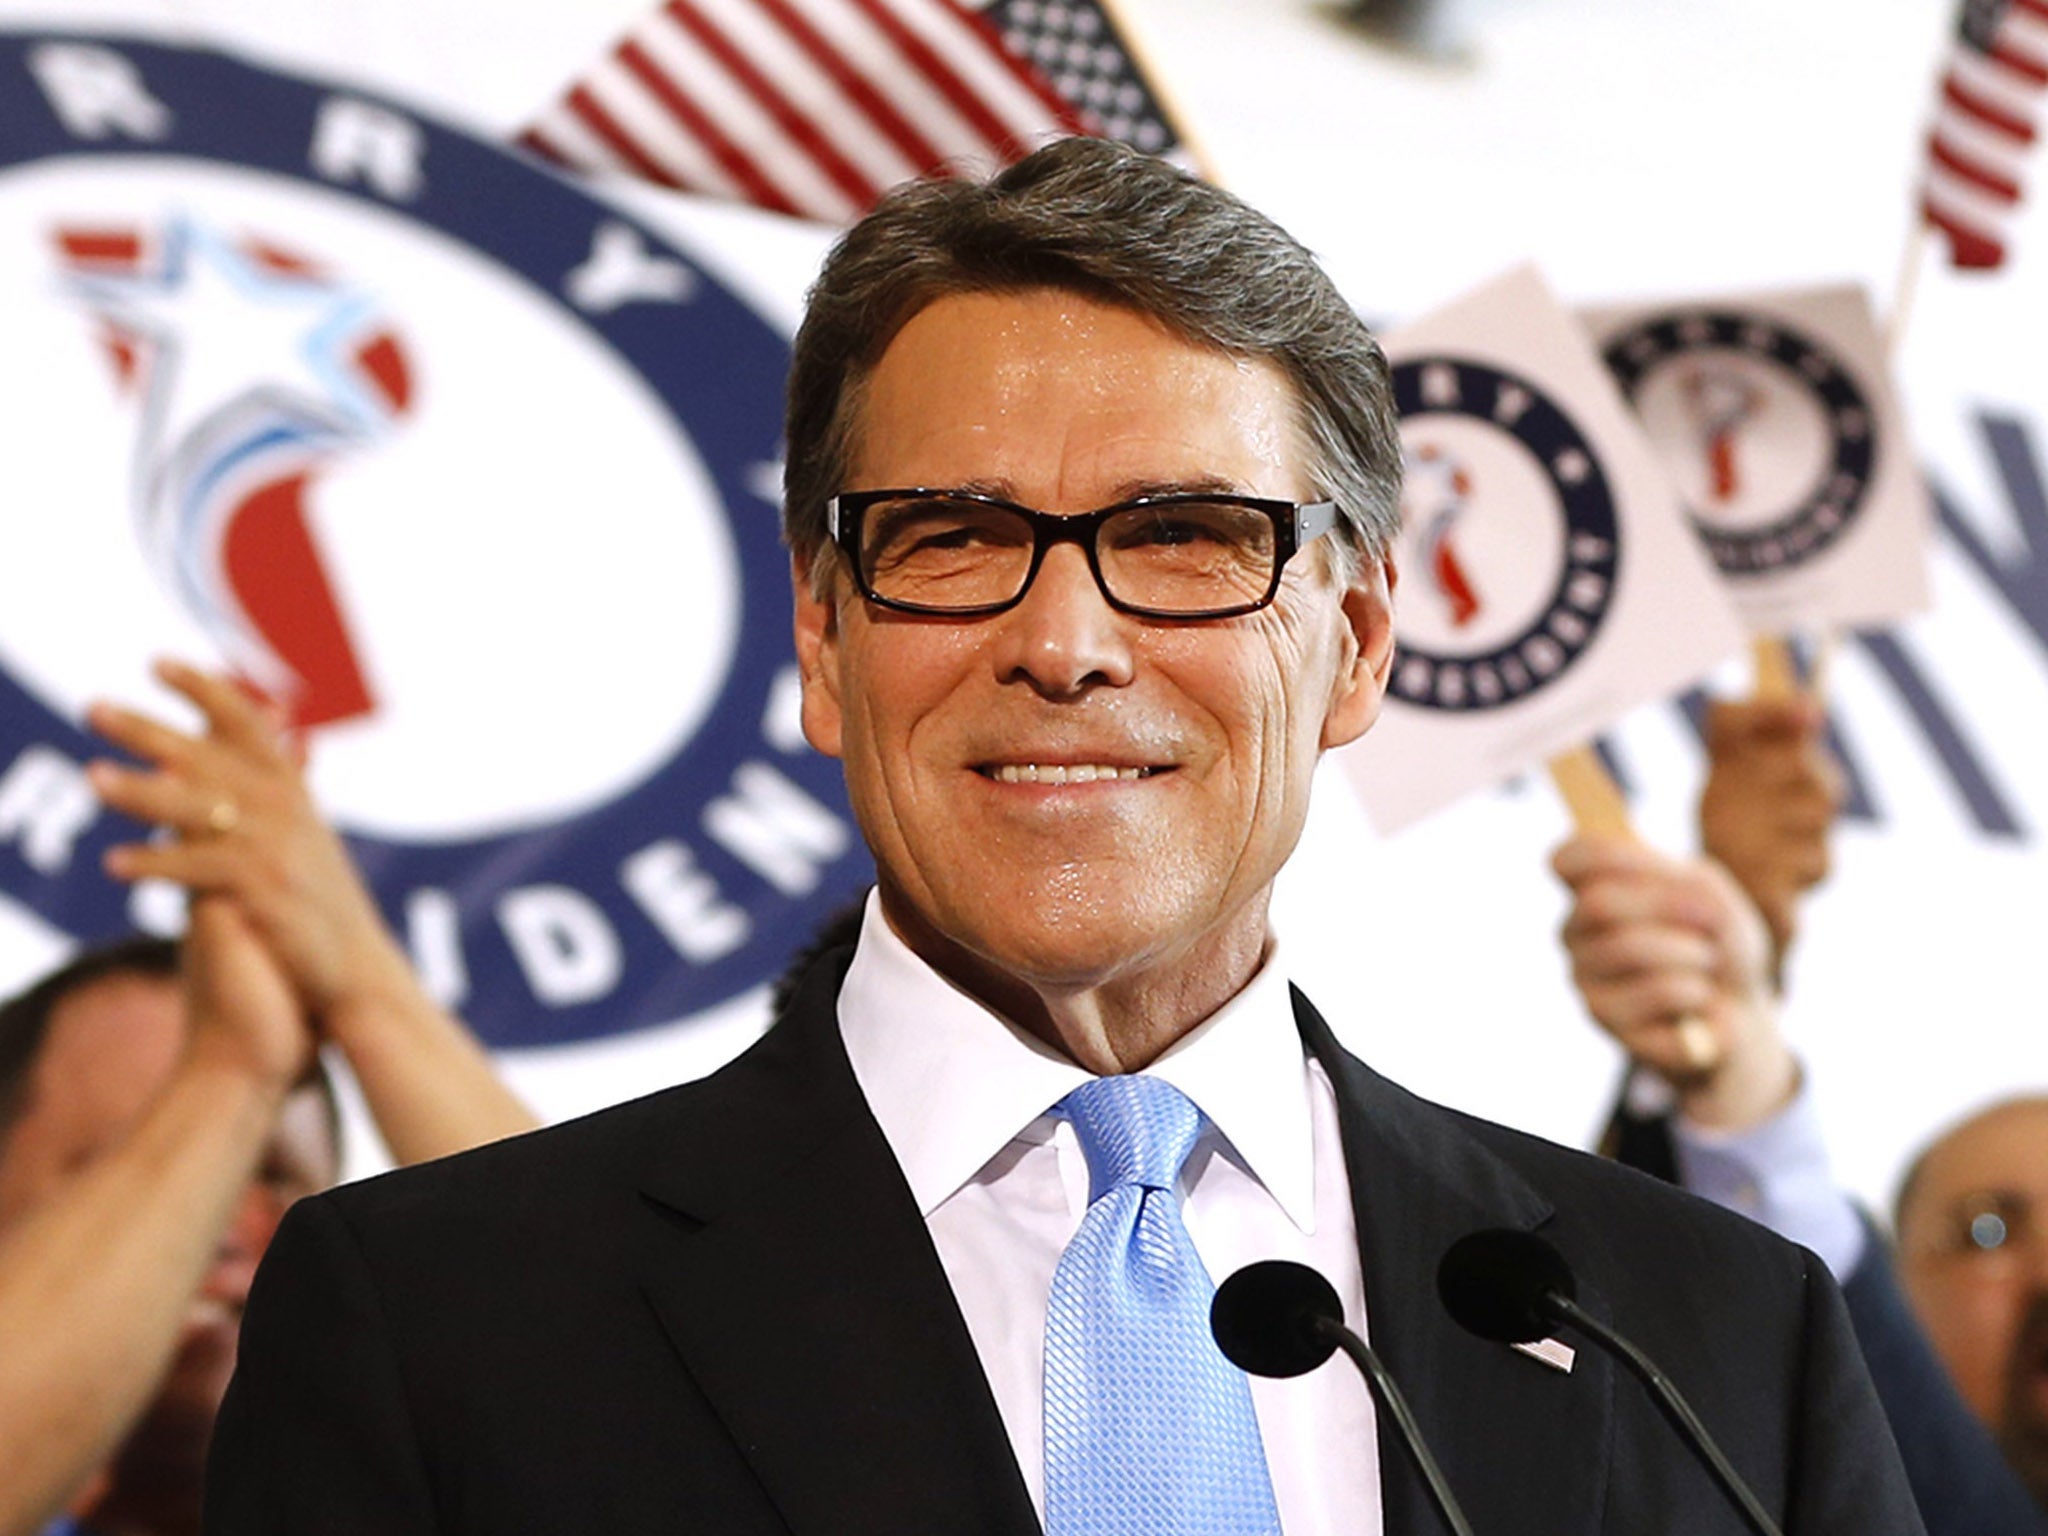 Former Texas Governor Rick Perry said he would support the death penalty if Roof is convicted